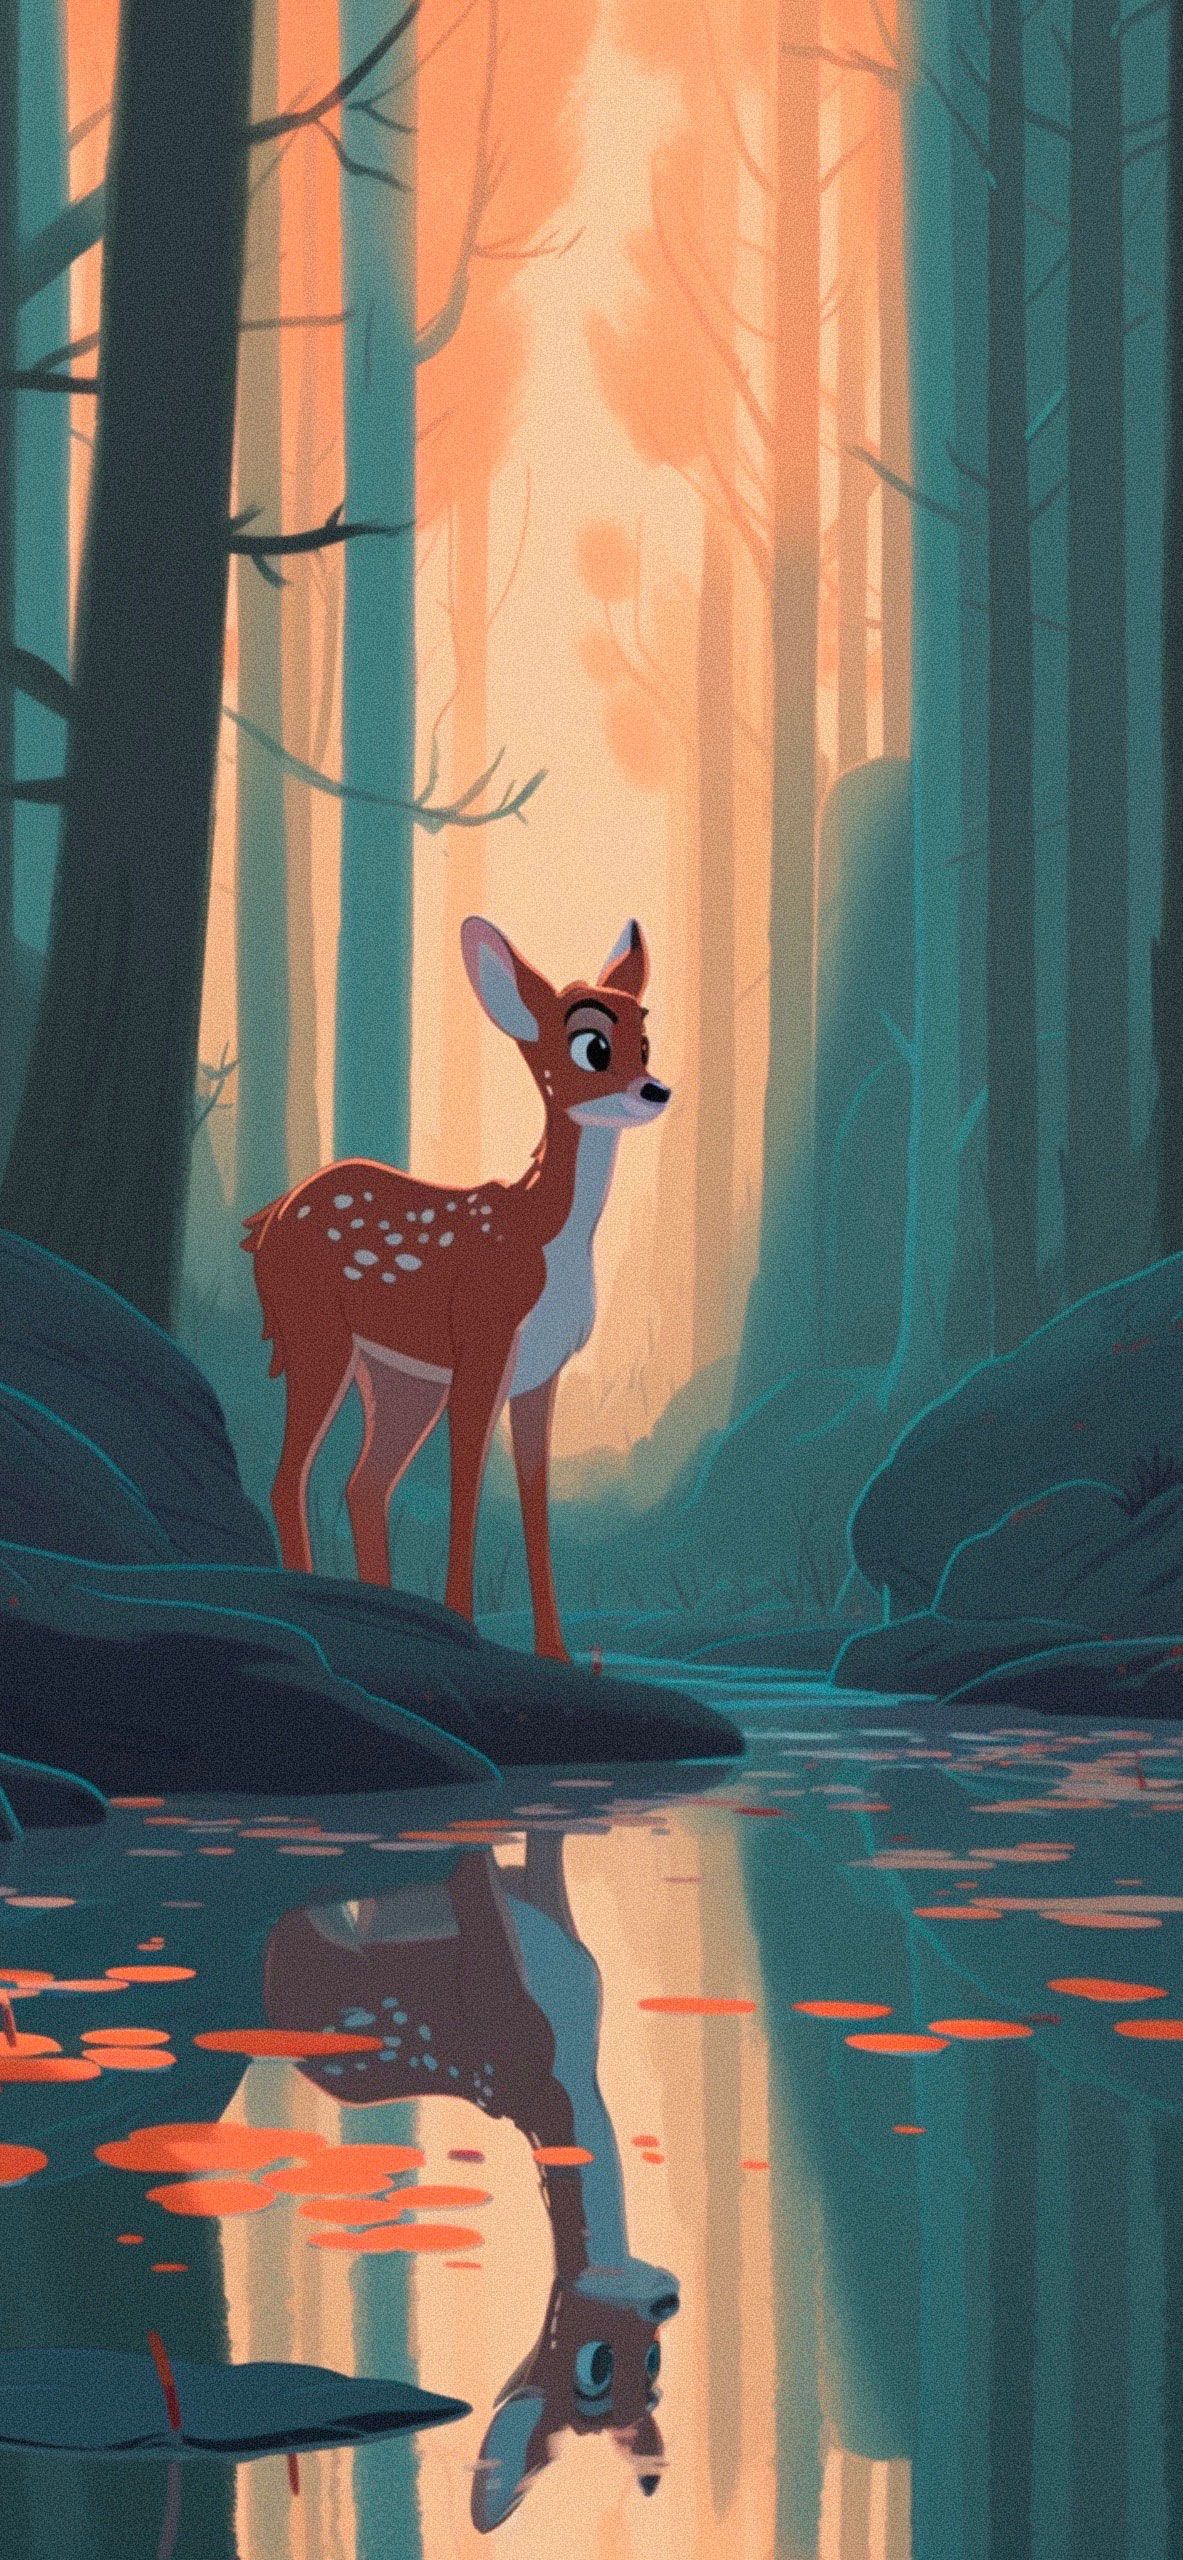 A fawn stands in a forest, with a reflection in the water. - Cute, pretty, deer